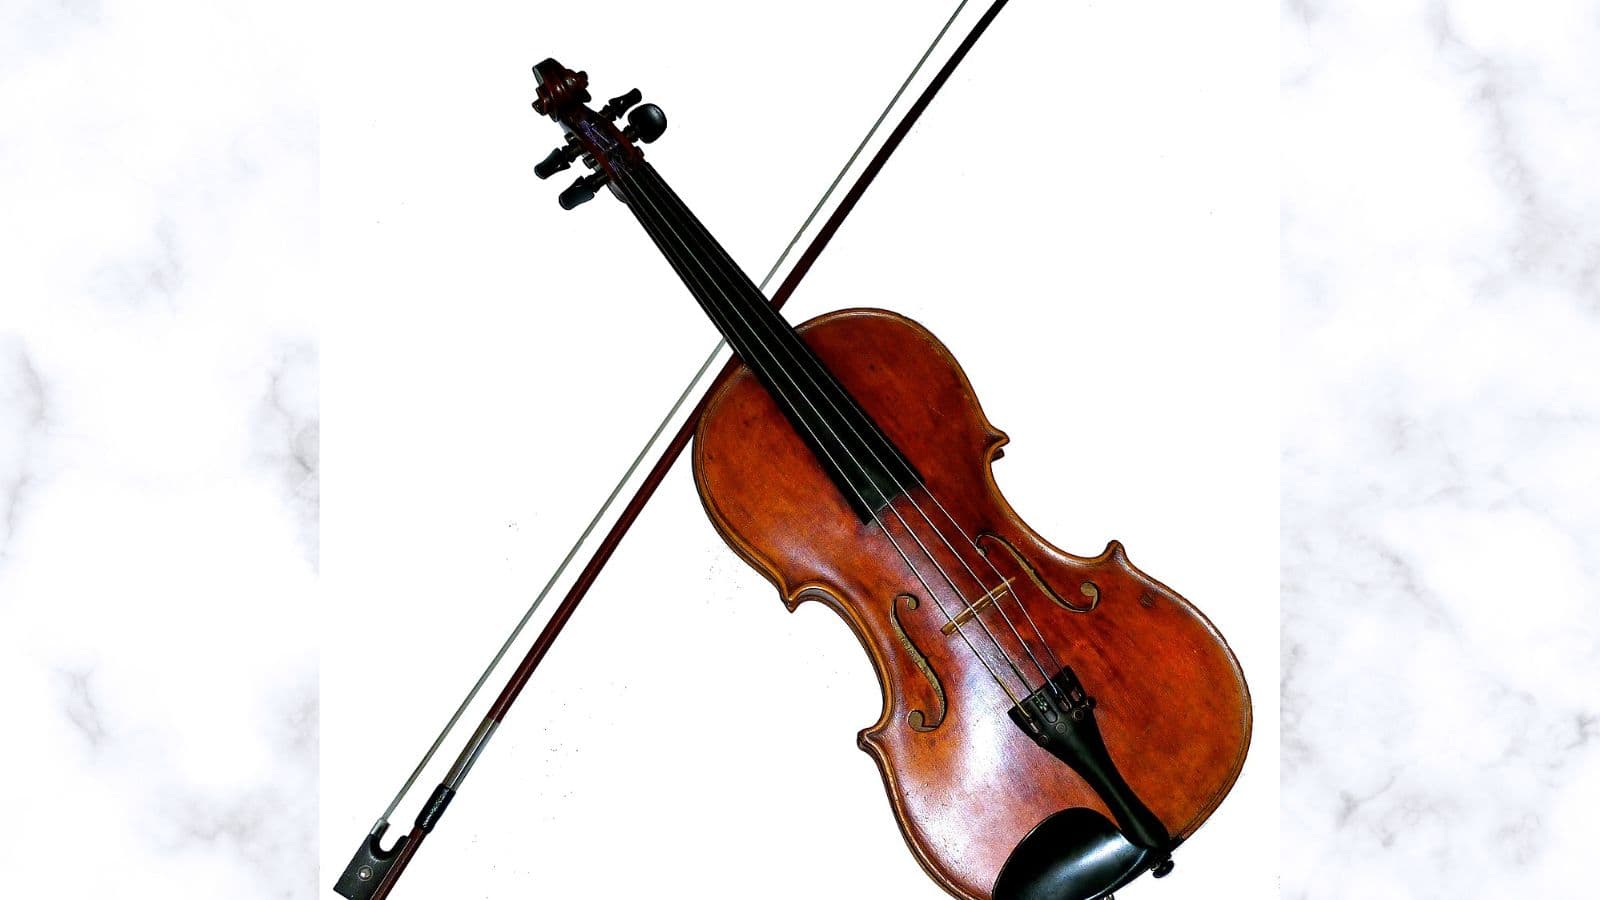 National Violin Day 2023: Date, History and Facts about Violins